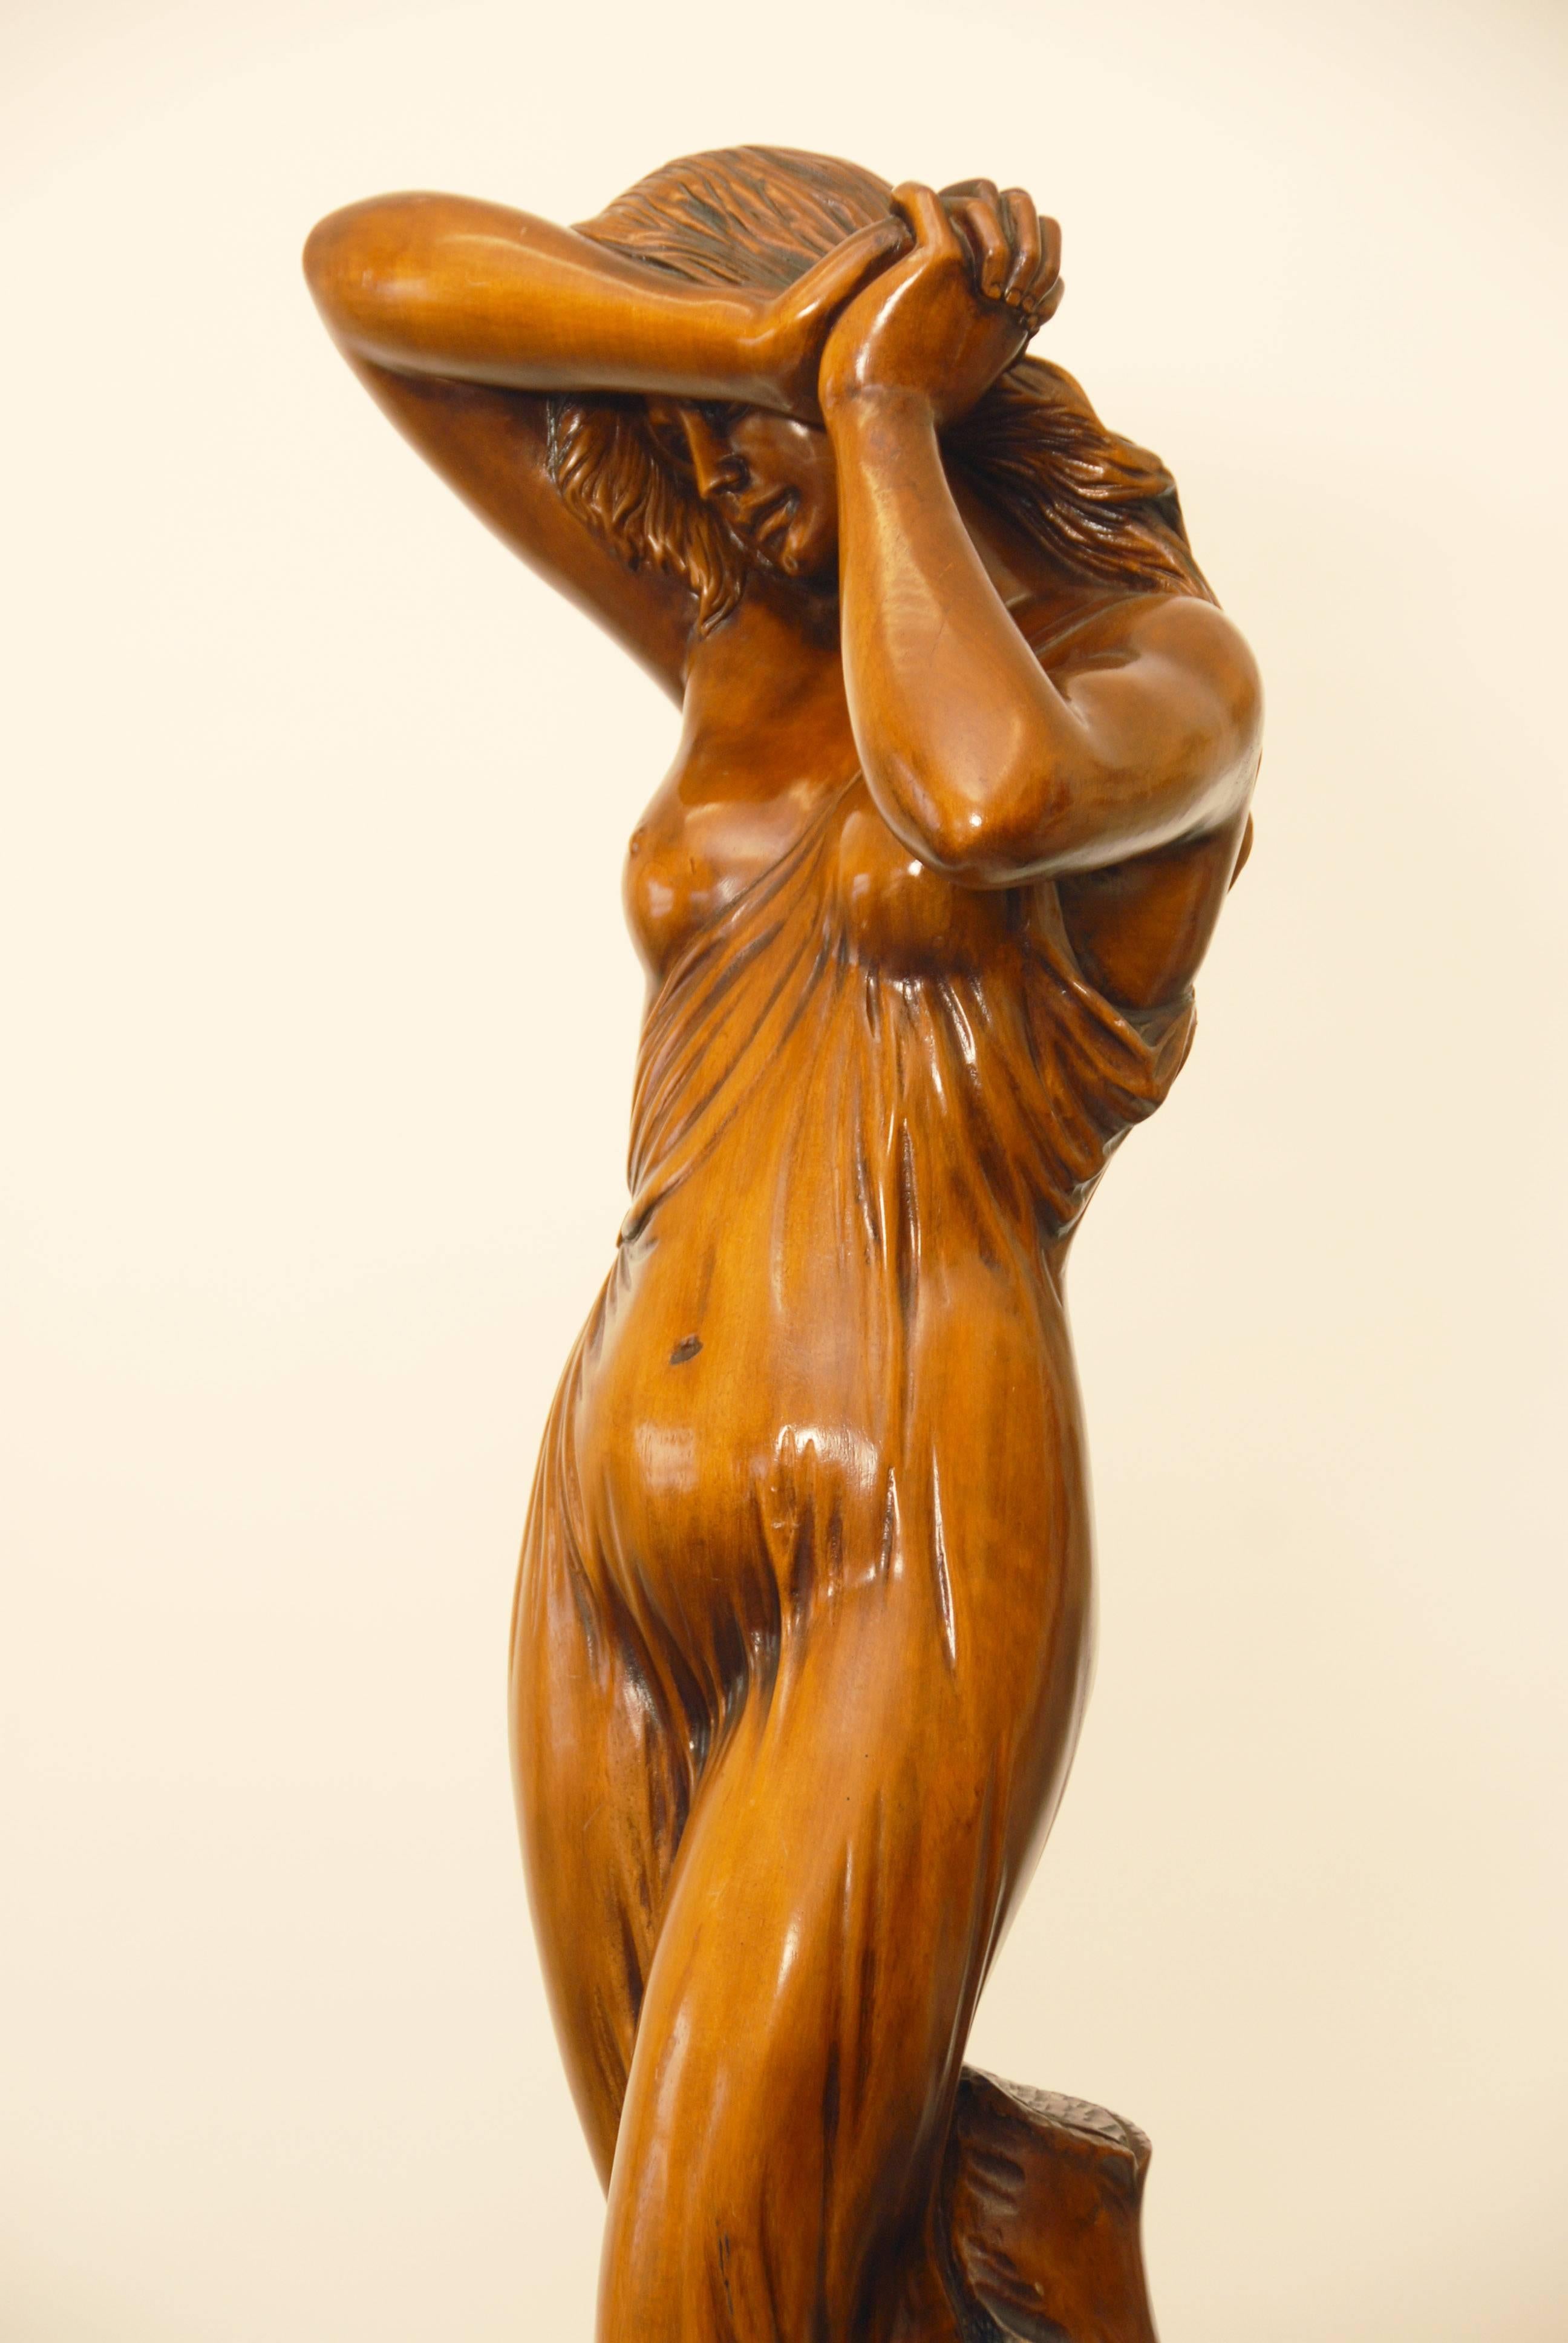 A very beautiful and sensuous sculpture in wood that is an impressive 63.5 inches high with a weight of about 25 kg or 55 lbs.